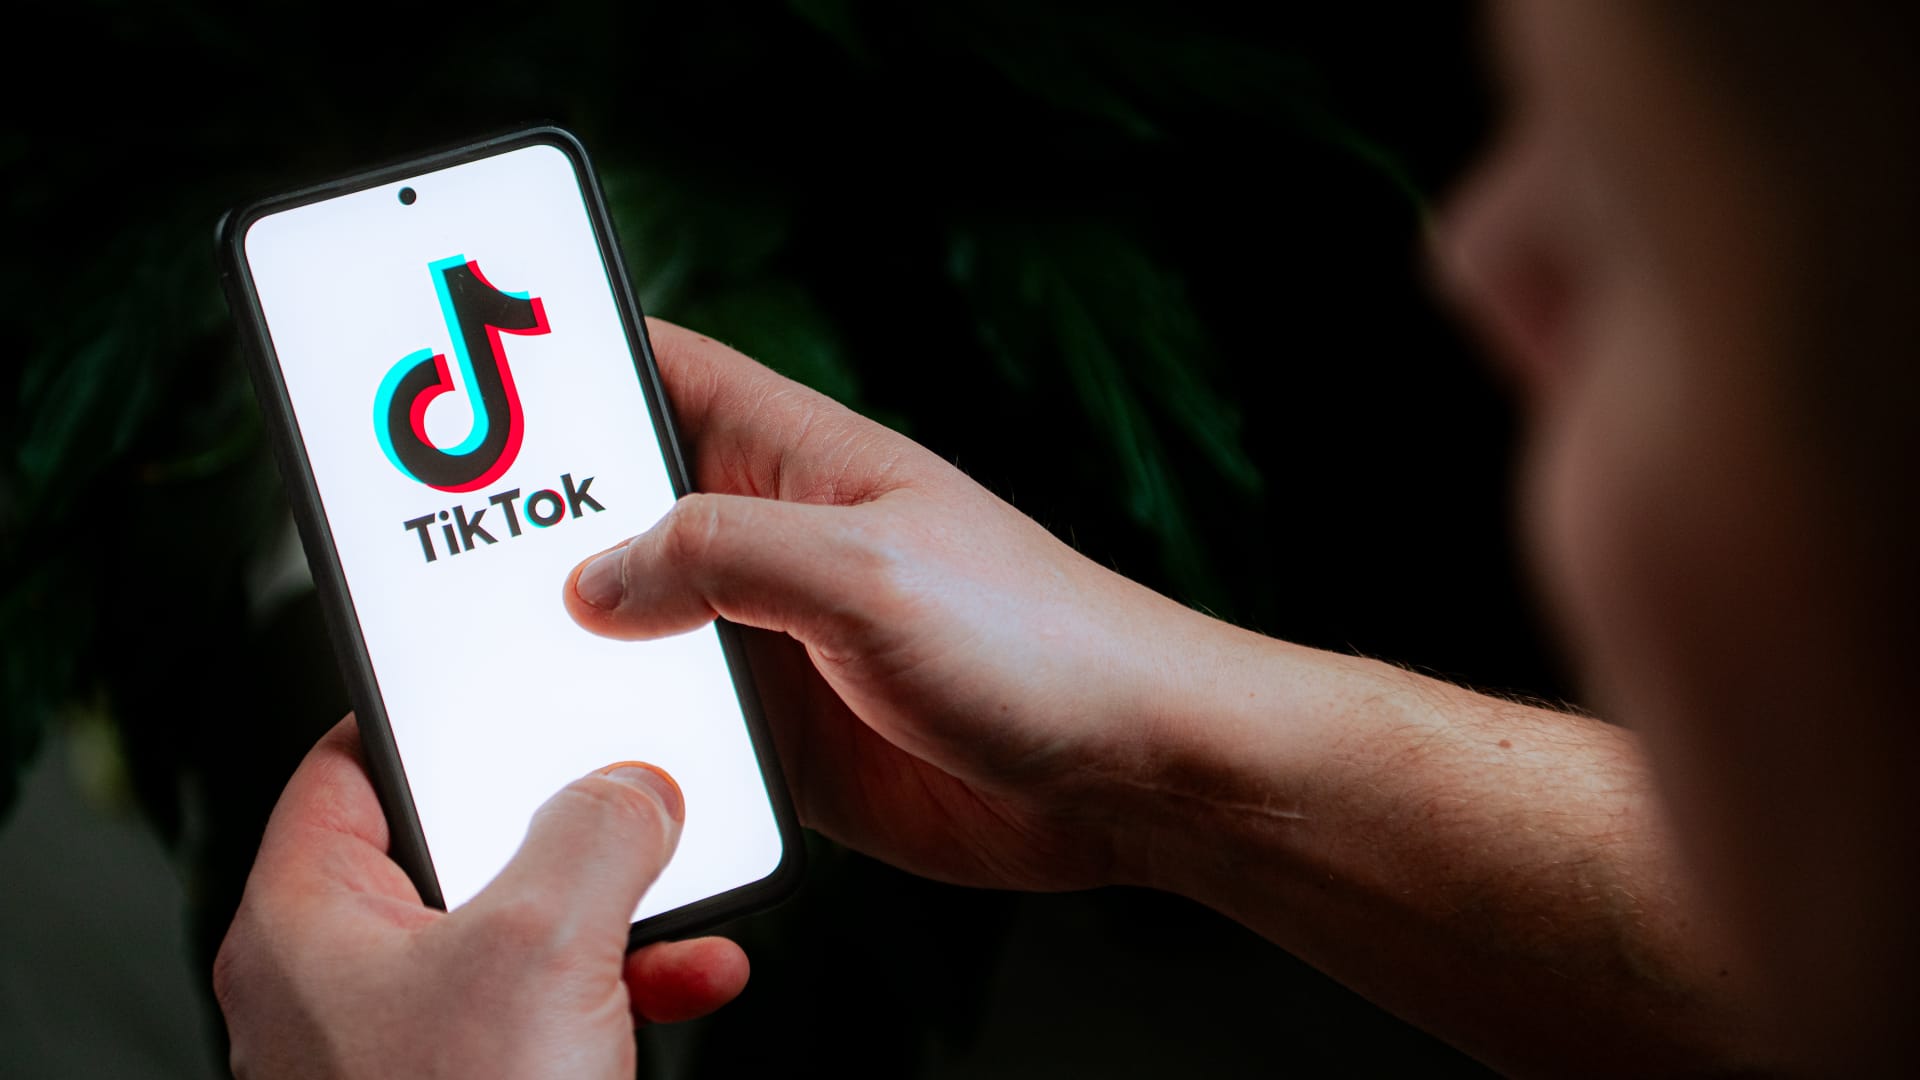 Indonesia's presidential election is due 14 February and candidates are going all out to win over voters in this country of 274 million. With millennials and Gen Z voters making up 56.5% of the electorate campaigning is often done on social media. One platform in particular has emerged as key, TikTok.